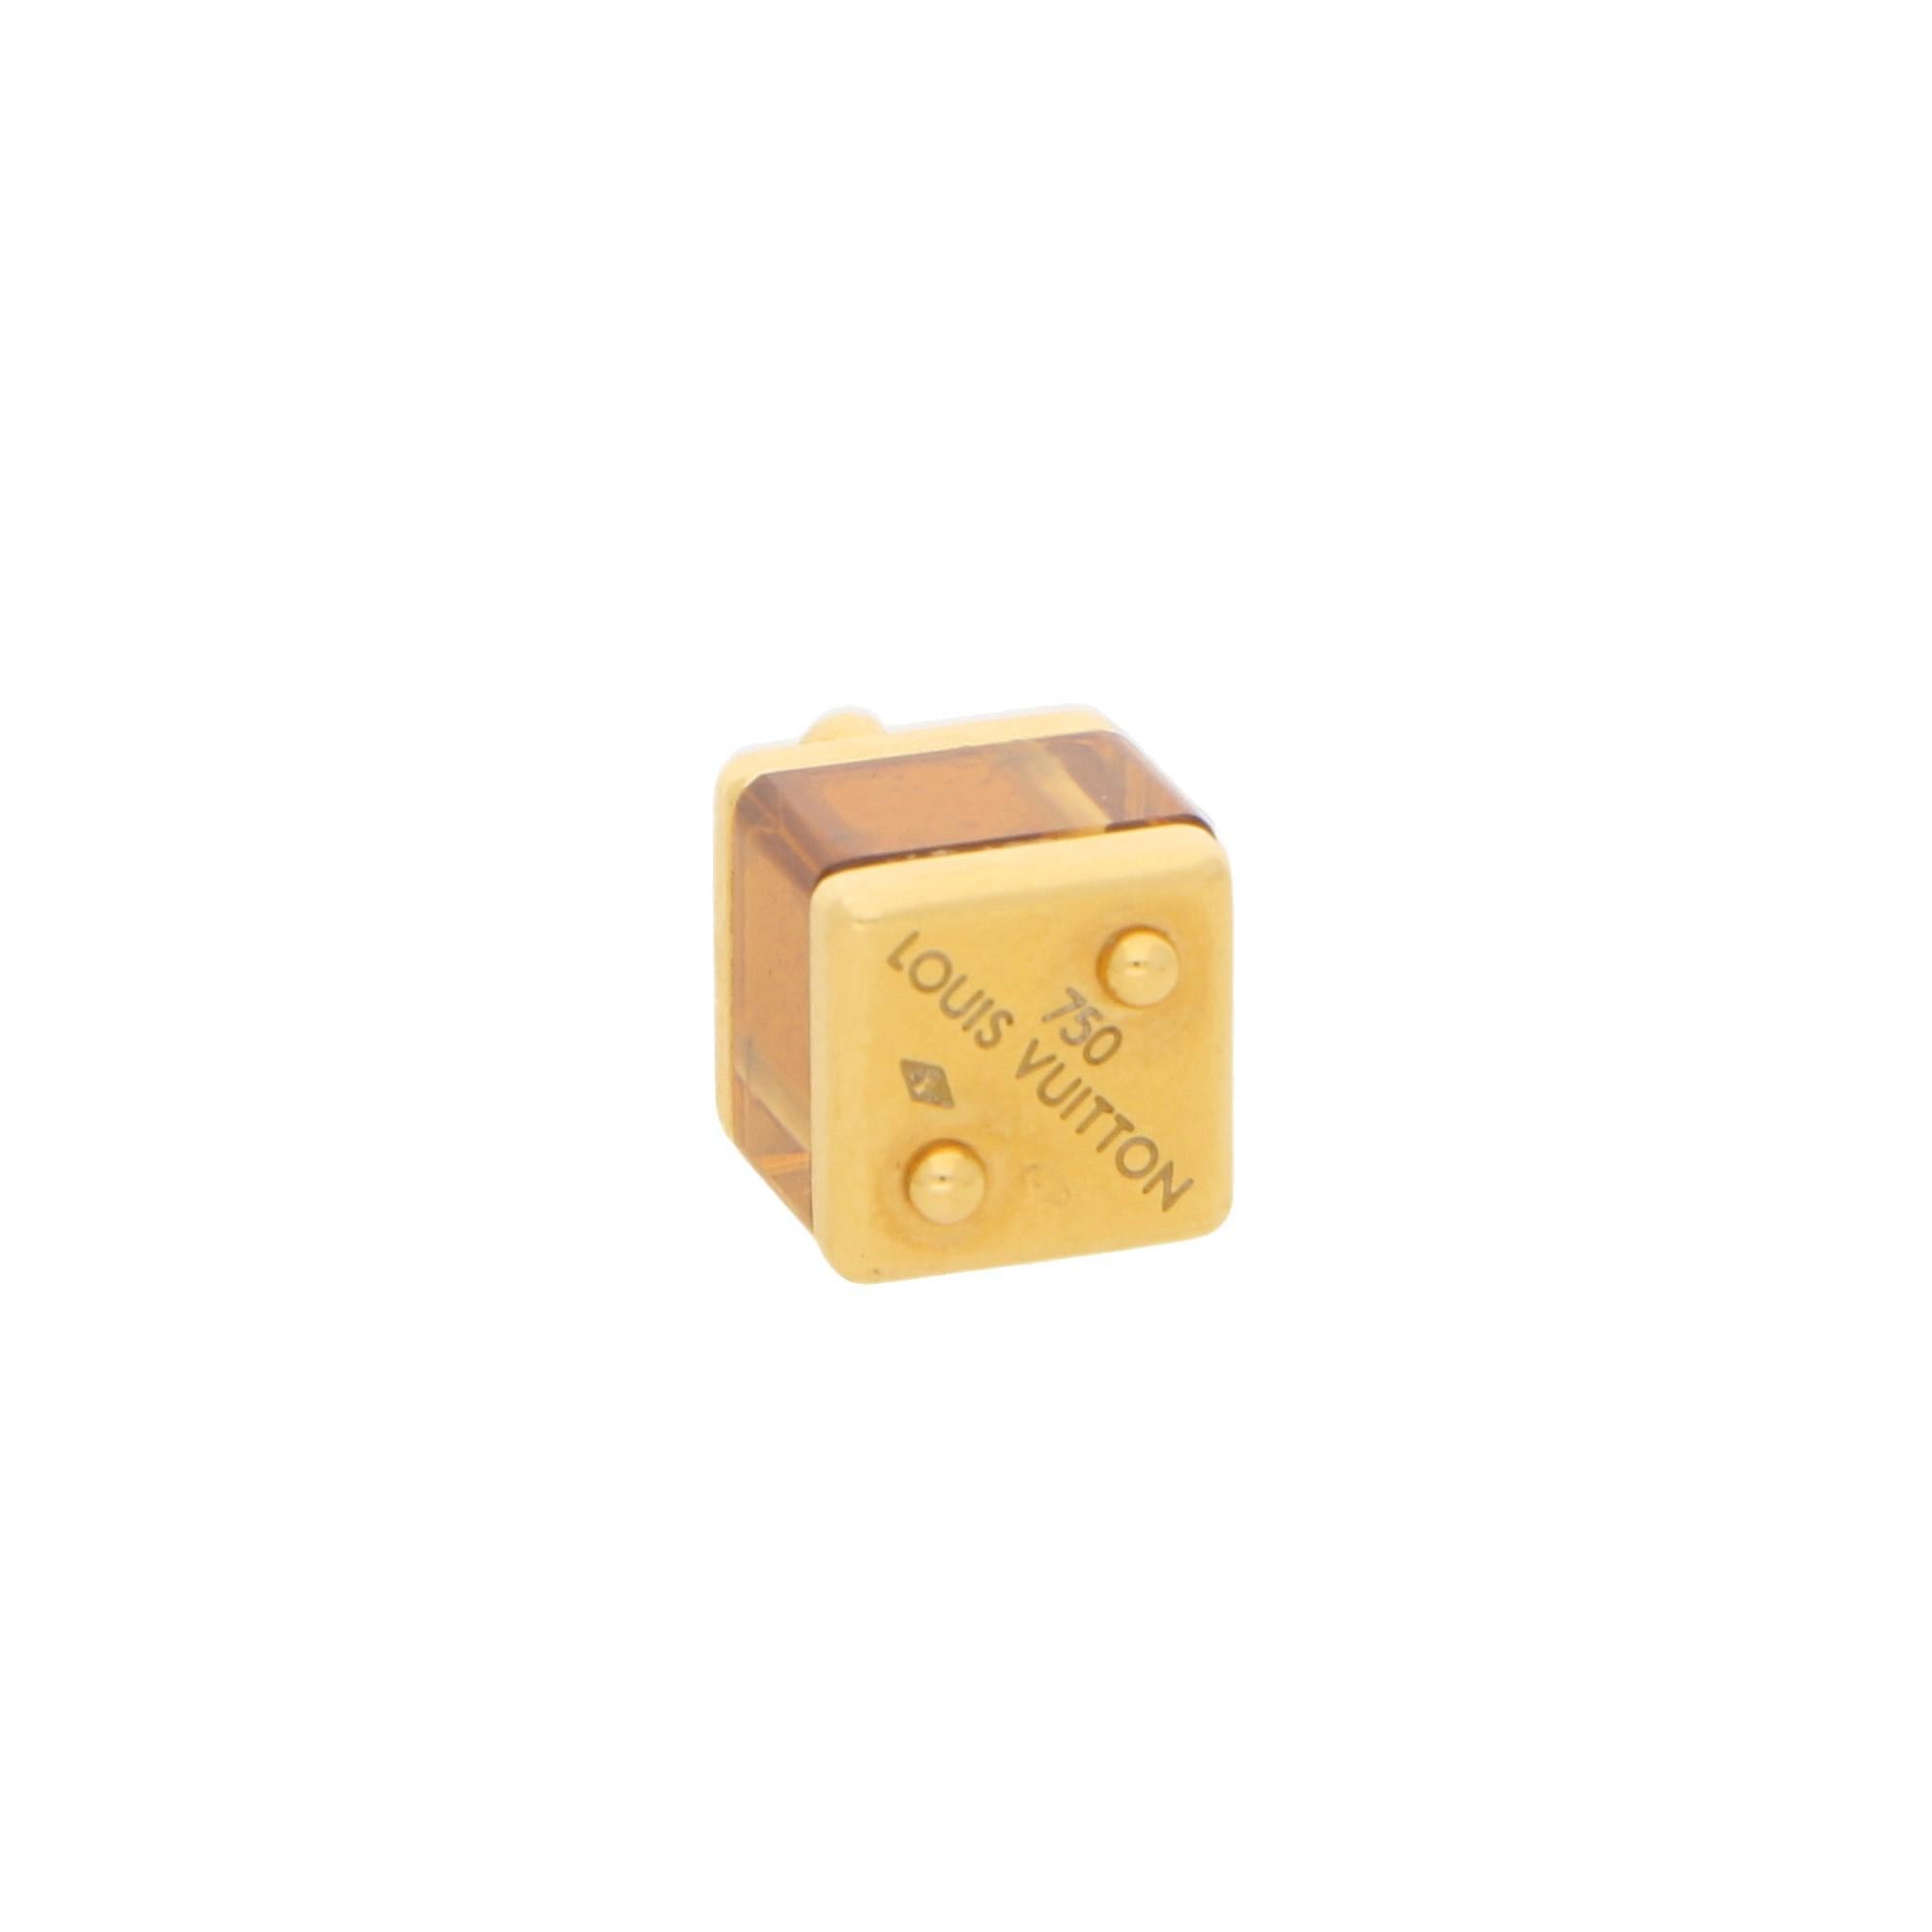 A beautiful Louis Vuitton citrine box charm set in 18k yellow gold. 

The charm is designed as a citrine cube within yellow gold borders, fitted to the top with a fancy fixed bail. 

Due to the size of the charm it could wasily be worn around the